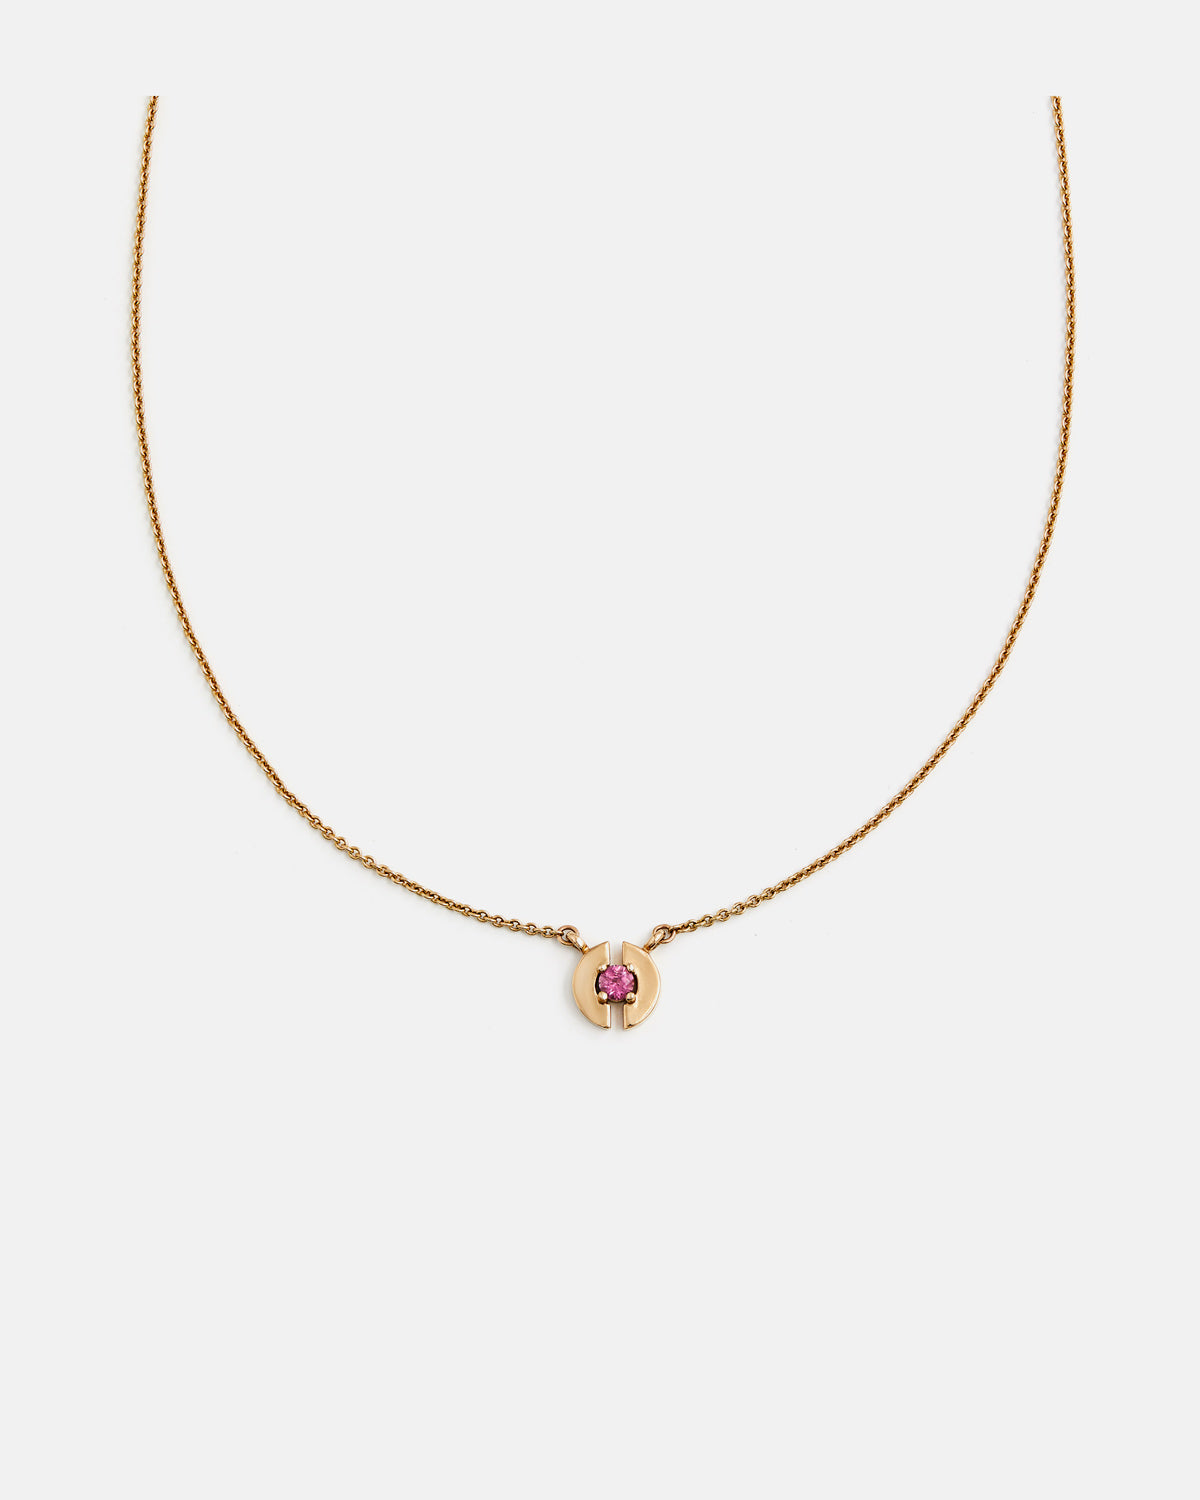 Stein Necklace in 14k Yellow Gold with Pink Tourmaline